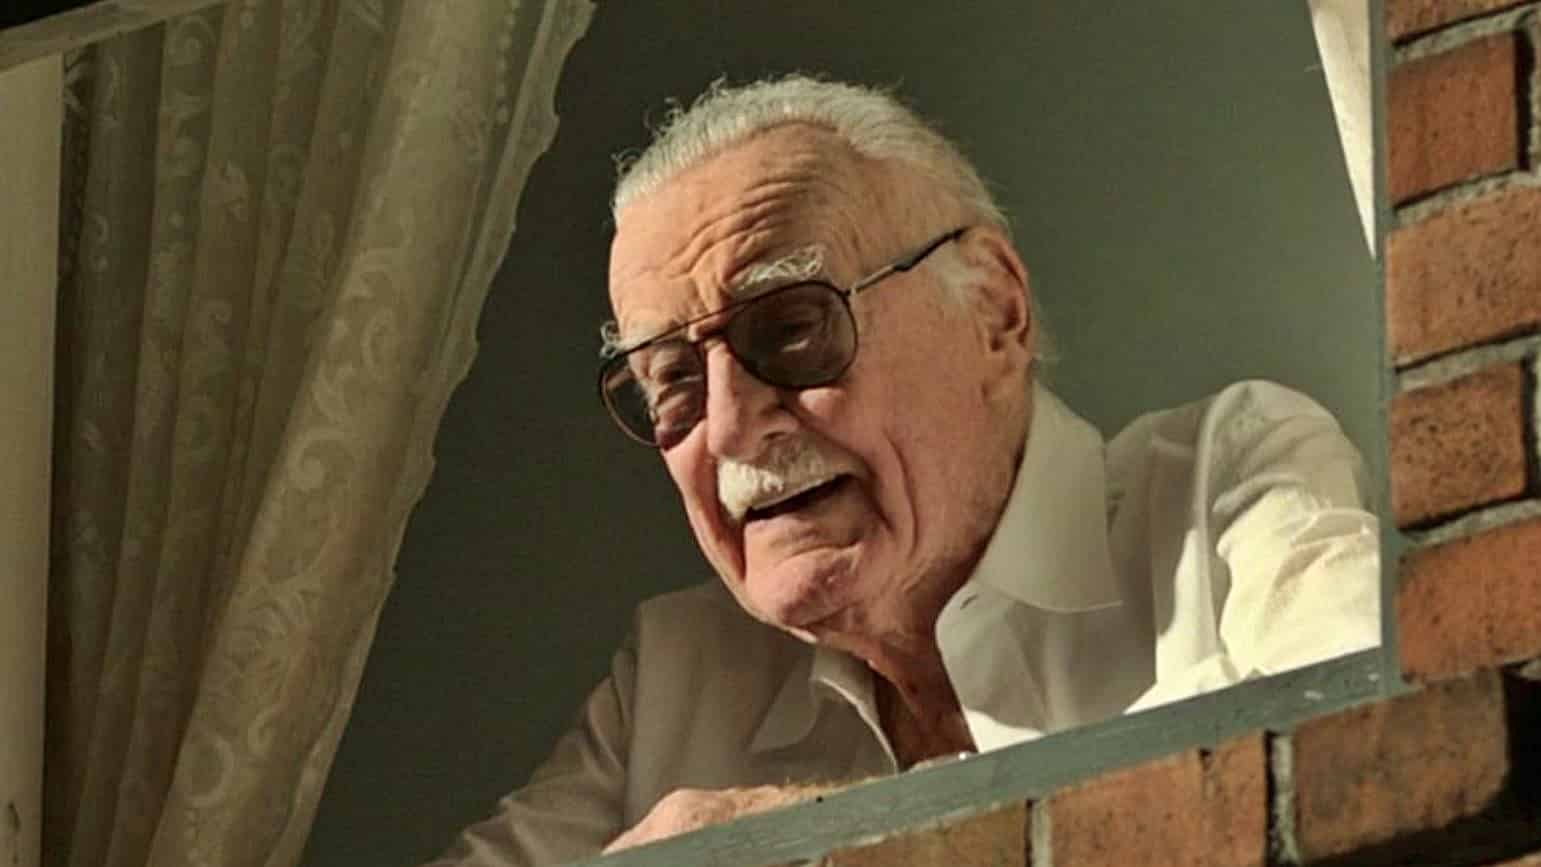 When We Will Probably See Stan Lee's Final Marvel Movie Cameo